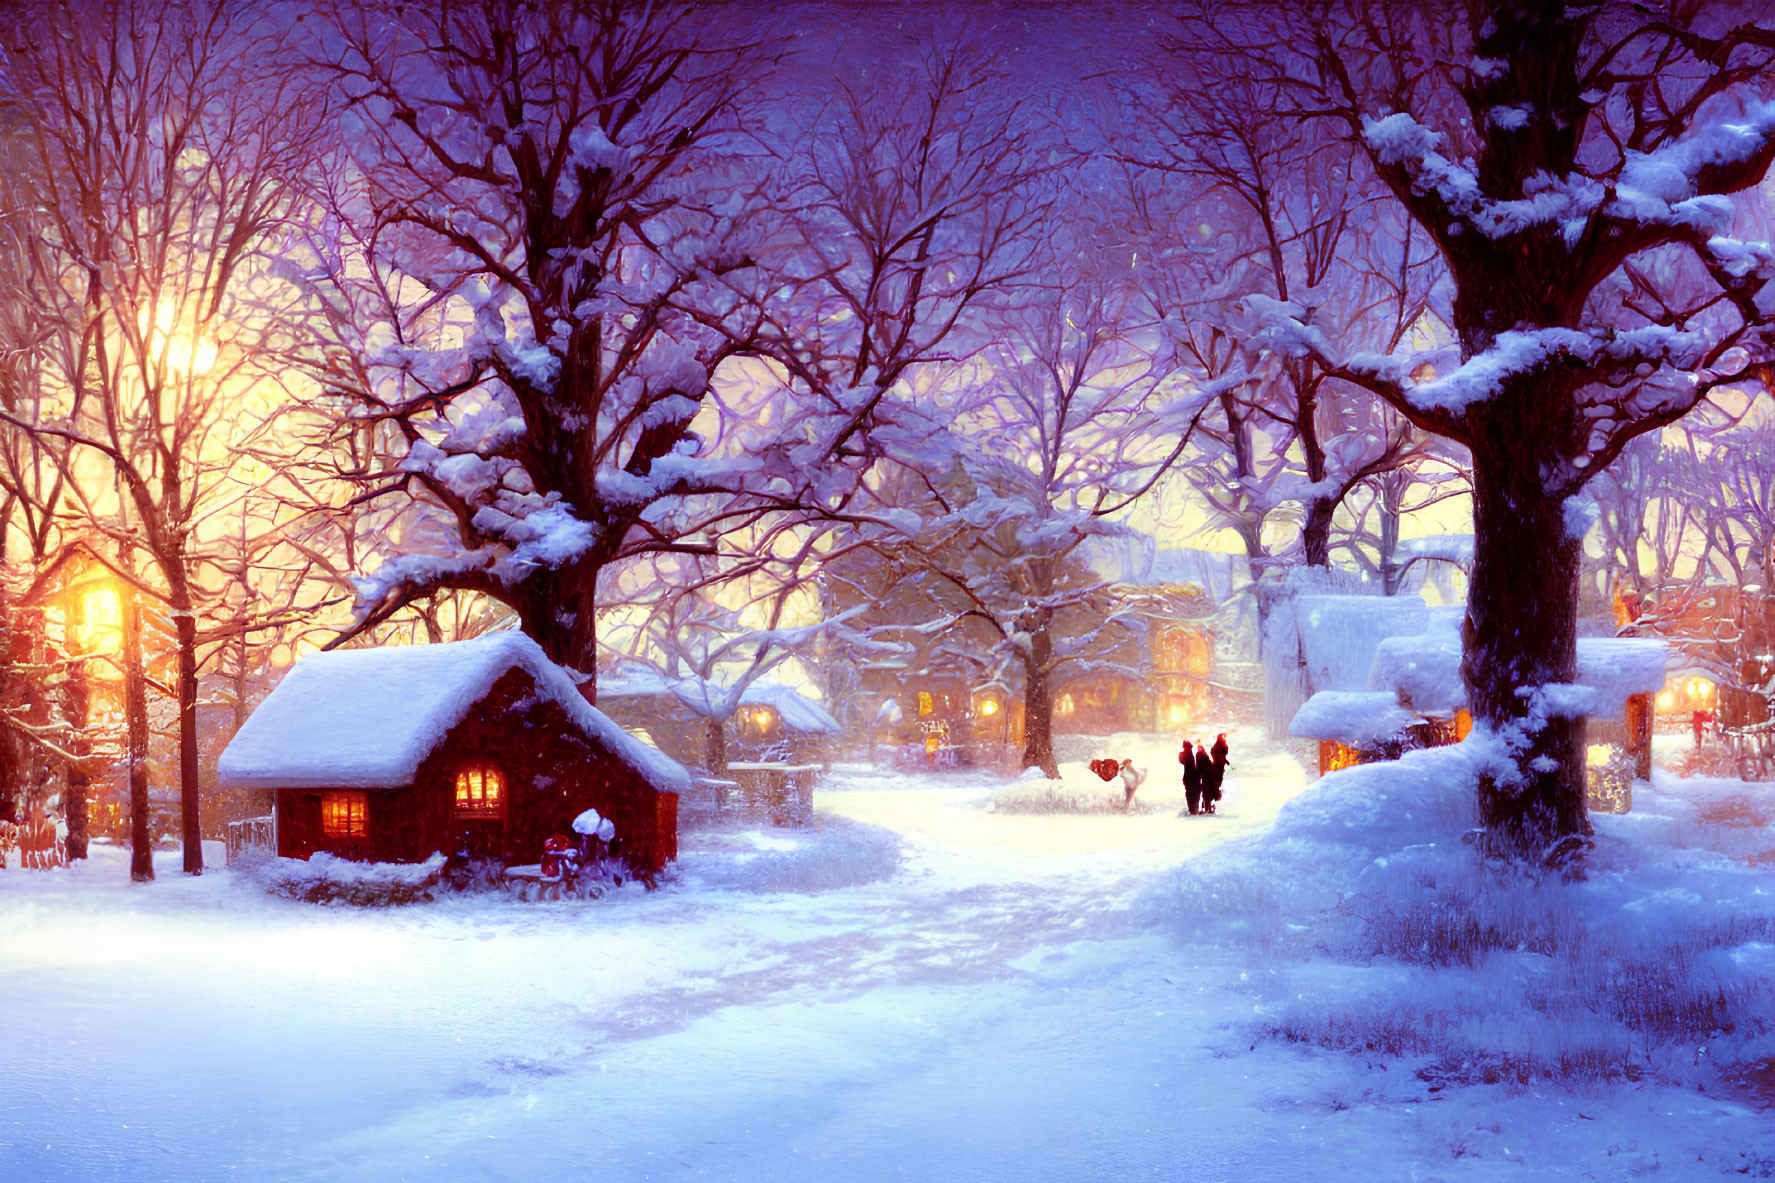 Snowy evening with warm light, cottages, bare trees, and people walking.